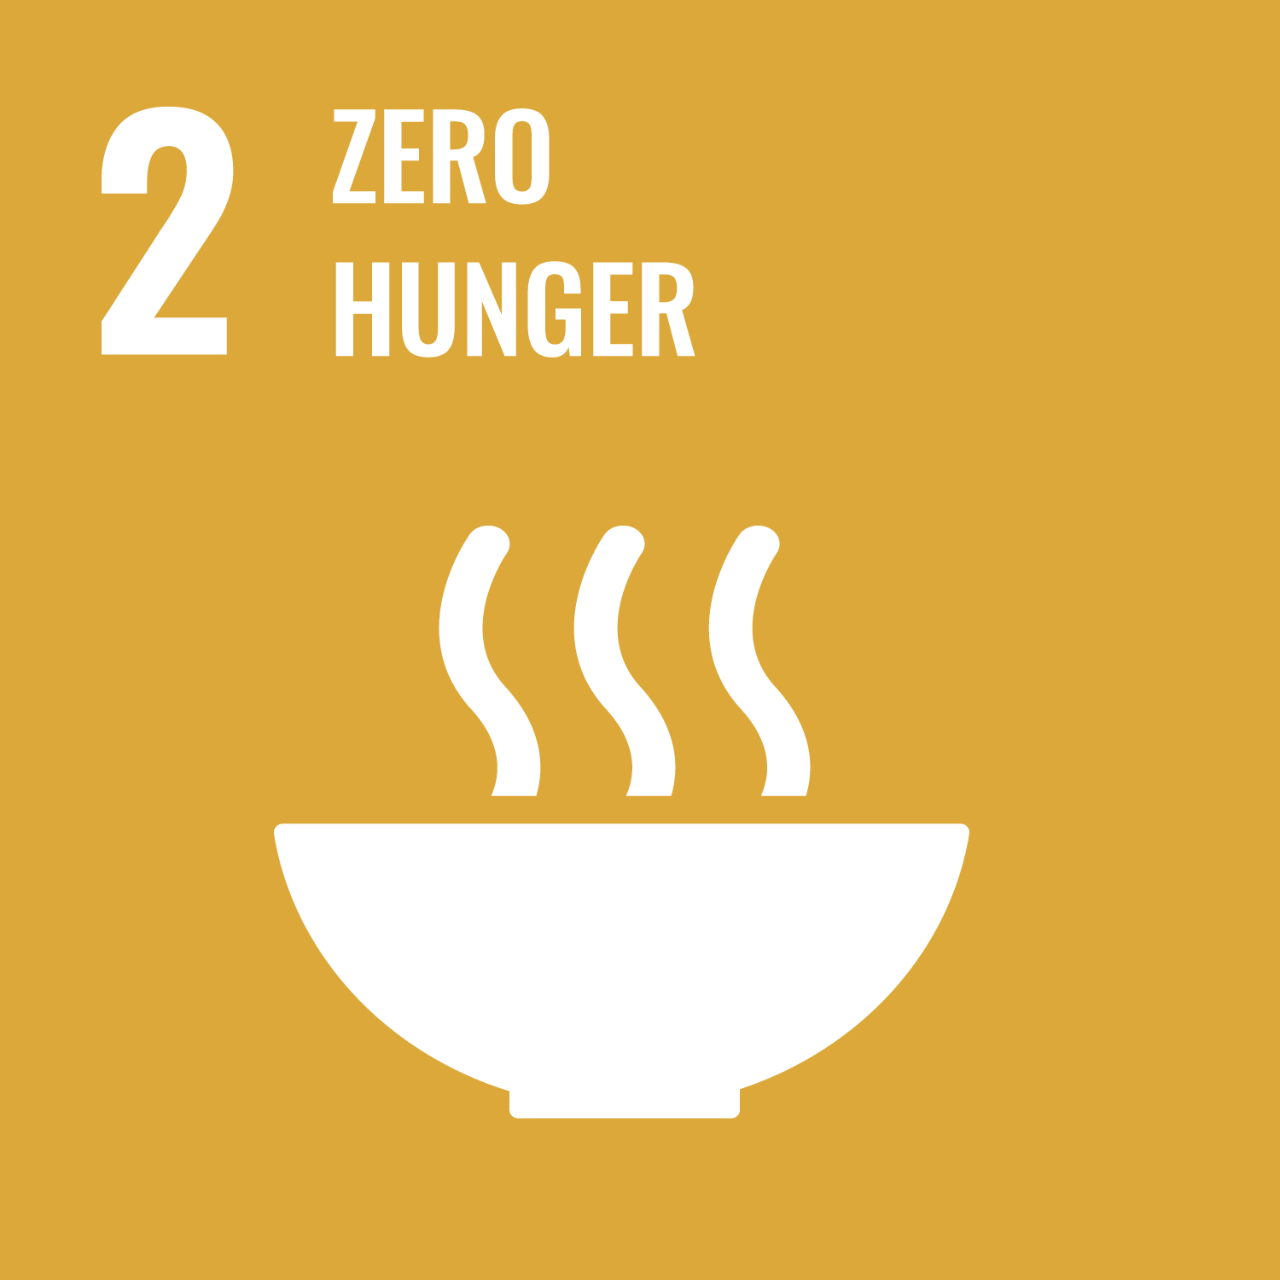 Gold icon with graphic of steaming bowl to represent UNSDG Goal 2: Zero Hunger.